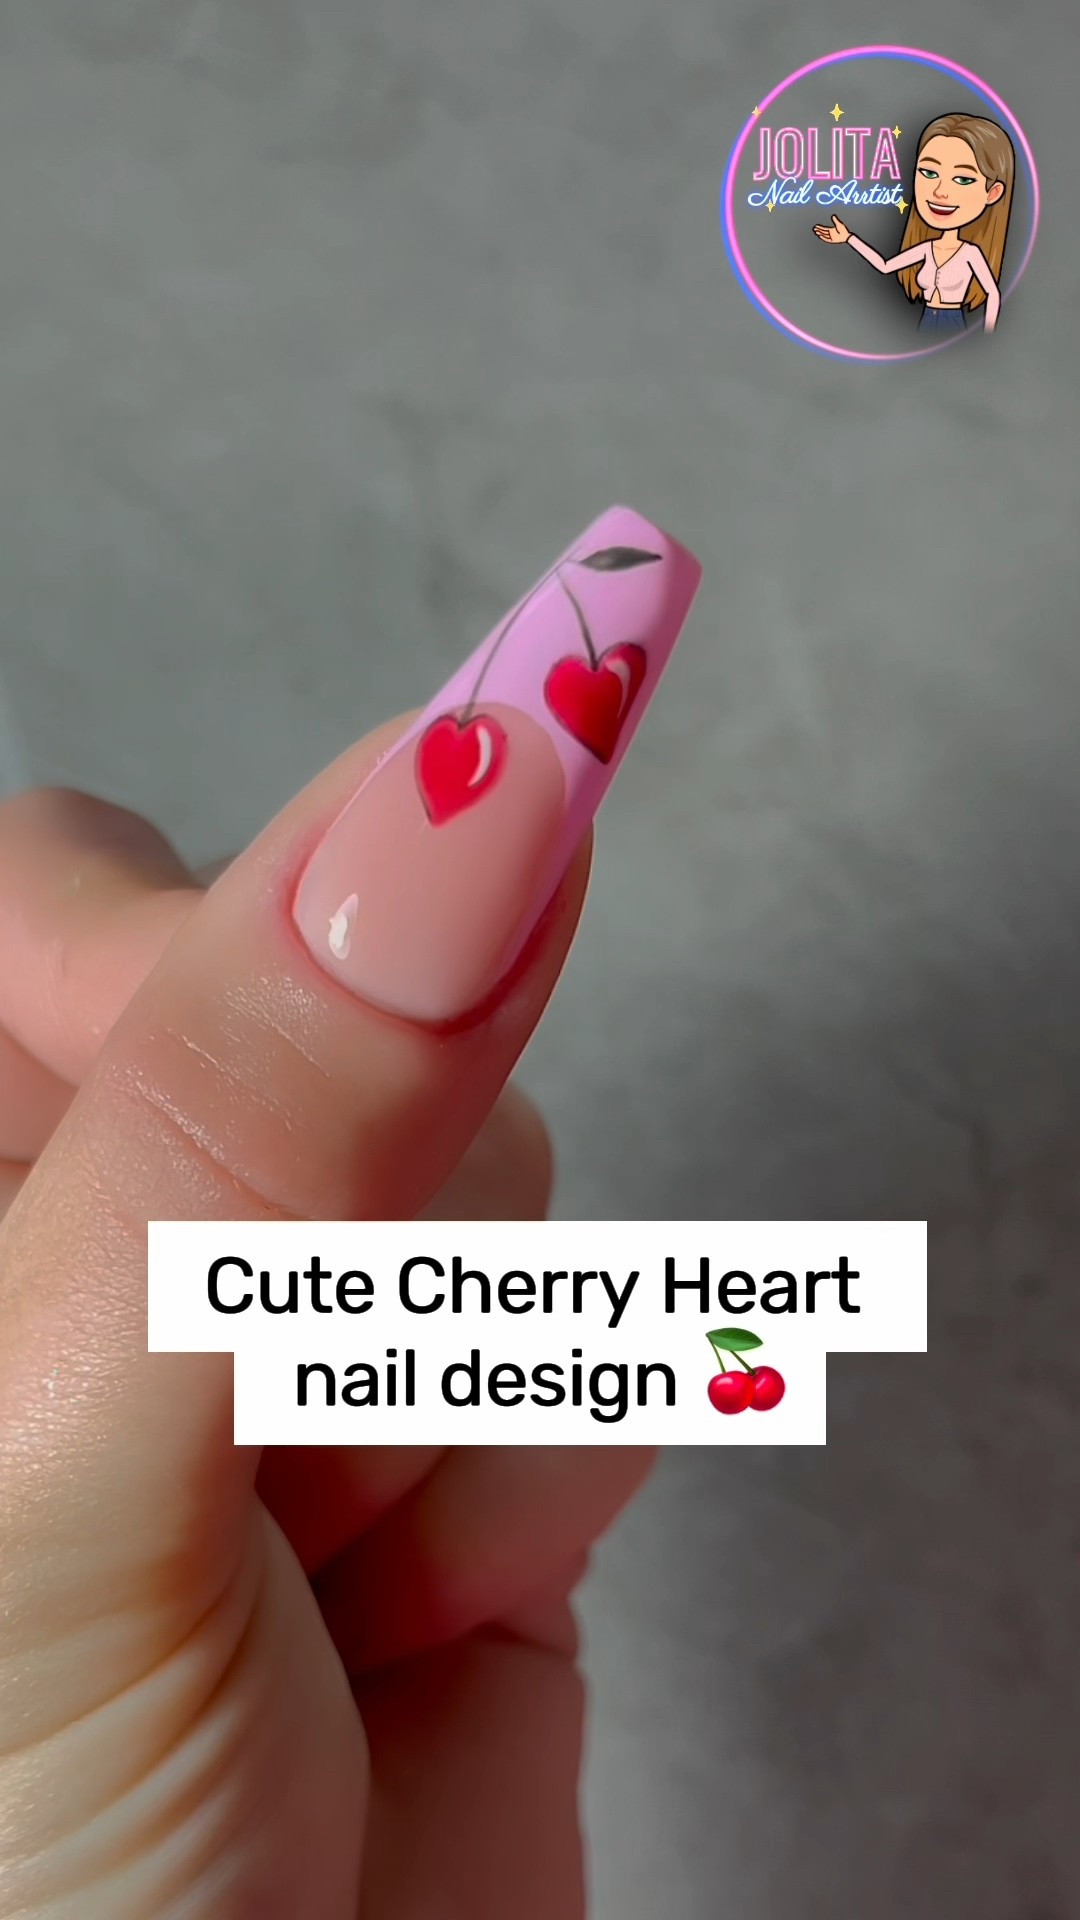 Nail Art Ideas for Doing Your Nails at Home — Izzy Wears Blog